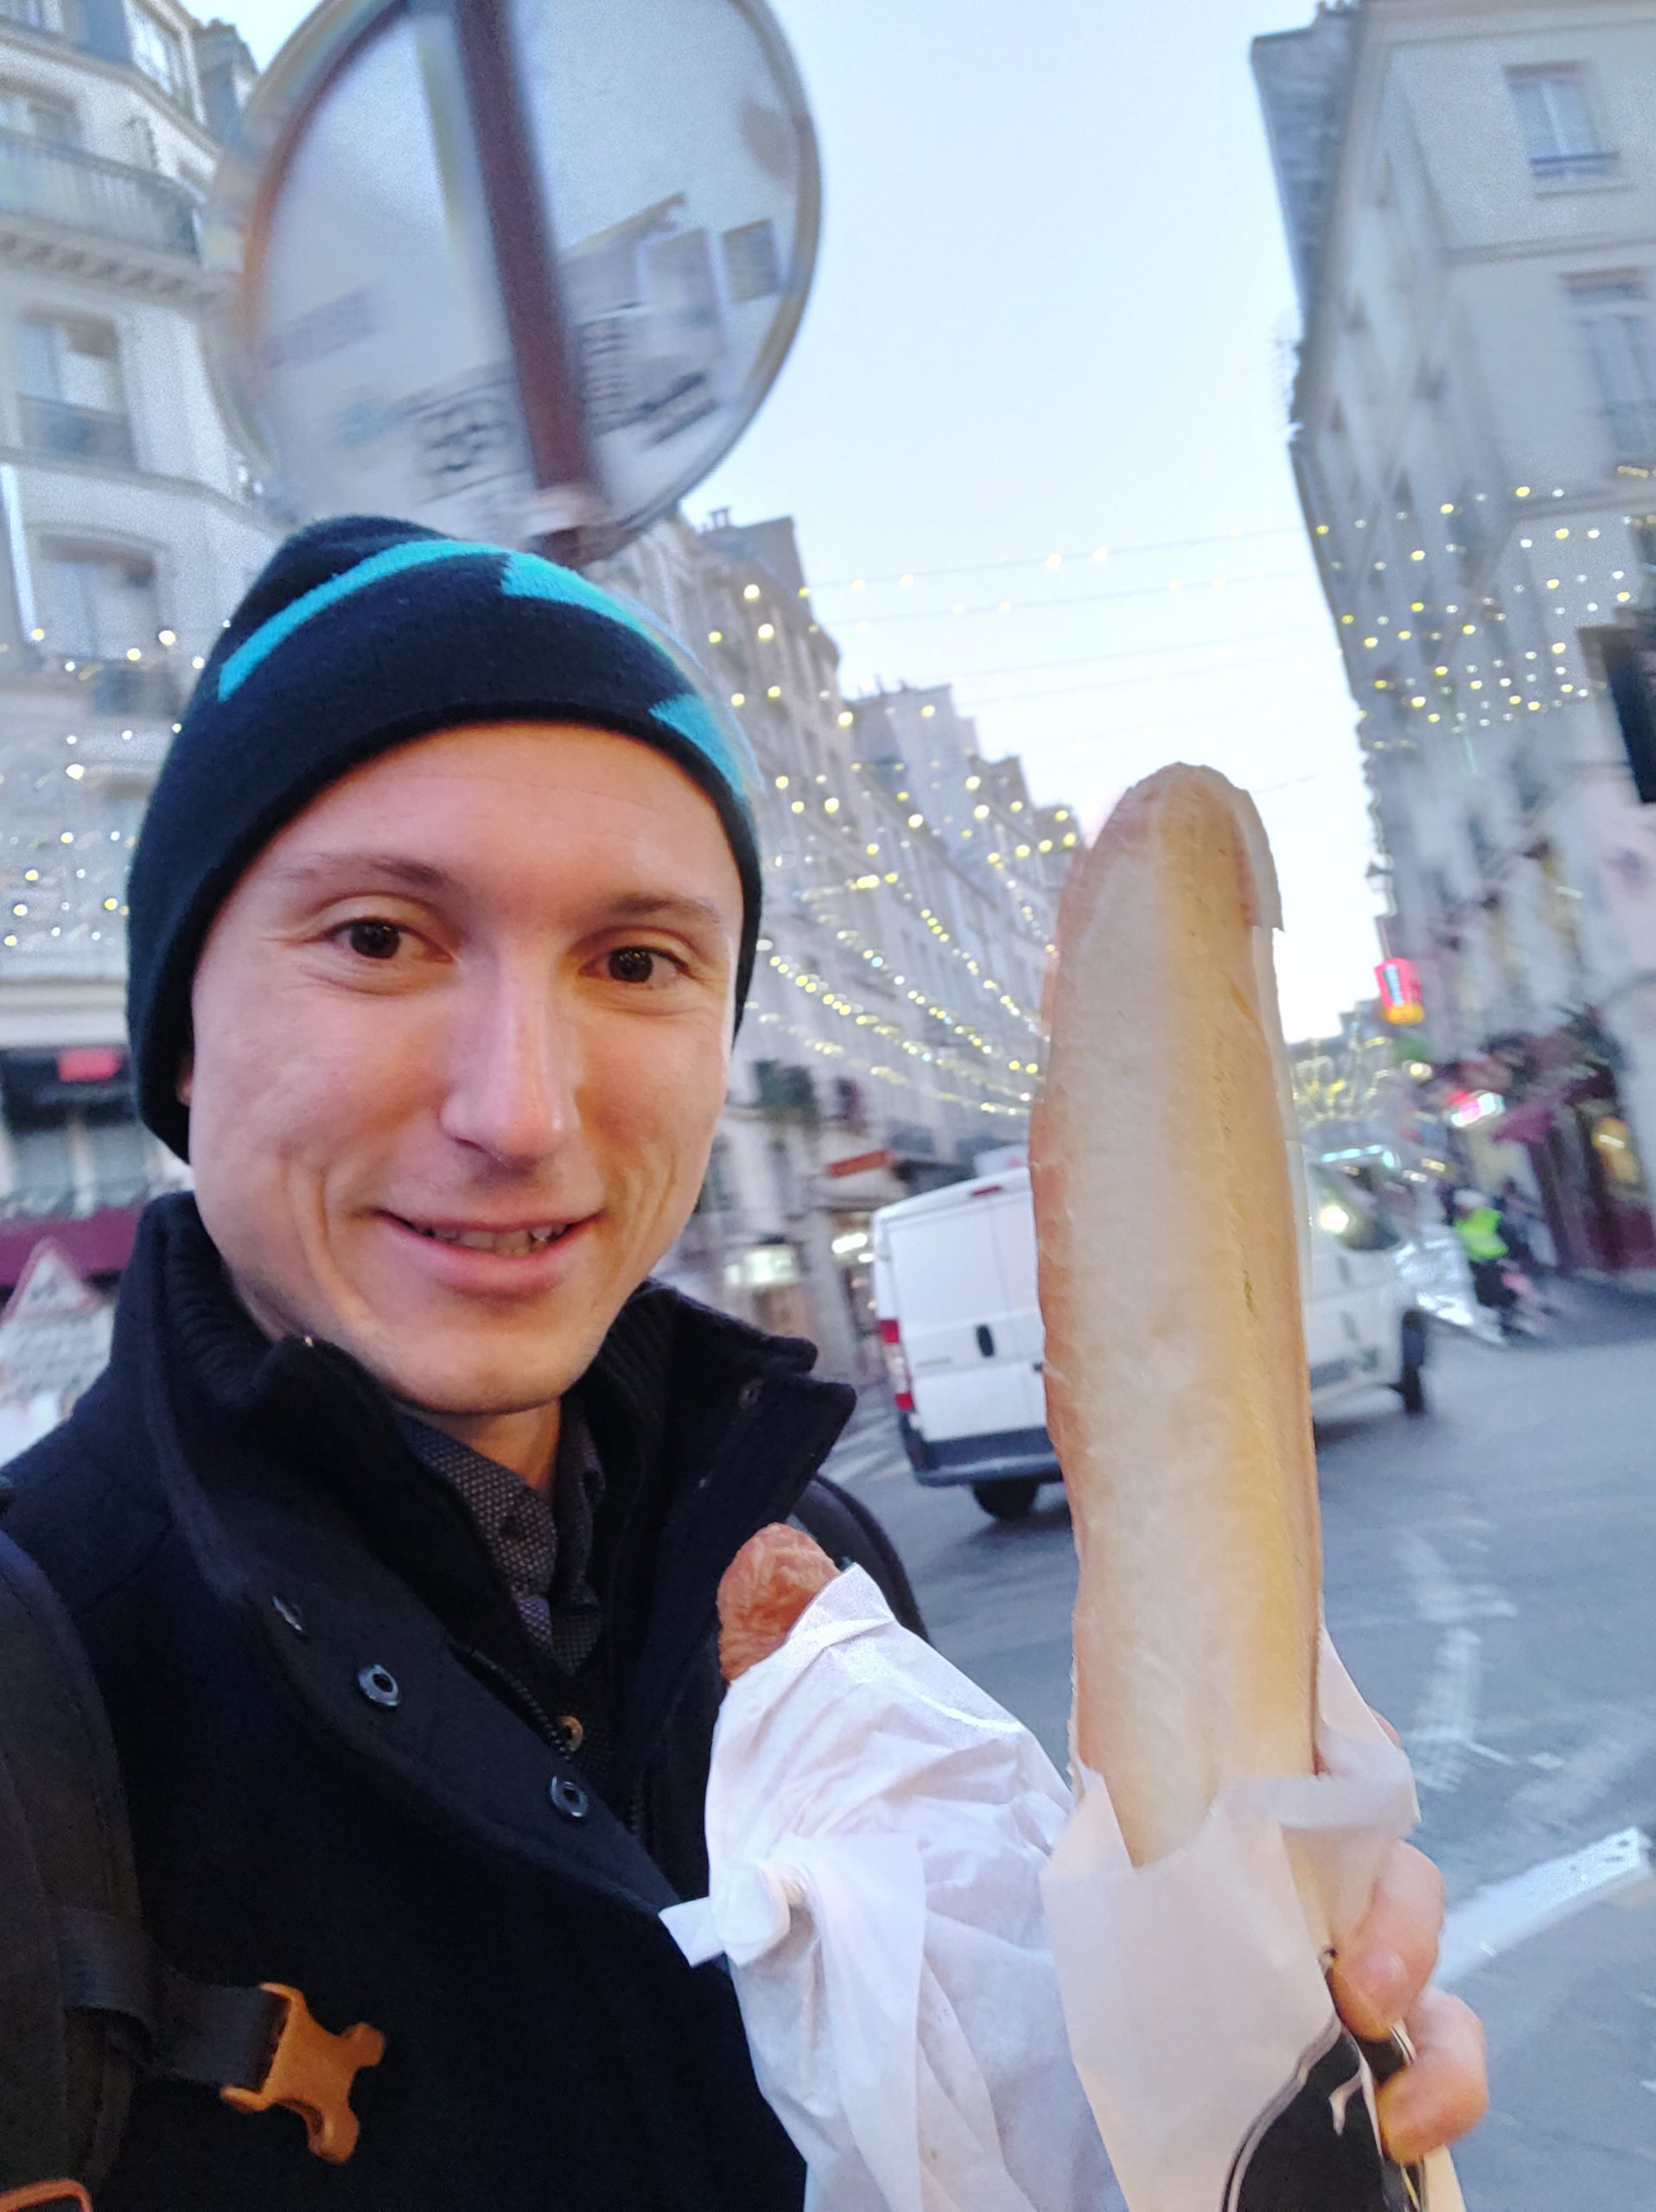 Breakfast each morning. I actually booked a hotel without breakfast on purpose, so I could try different bakers each morning. I never new how good the freshly baked baguettes can be, I ate them bare (without anything on them).